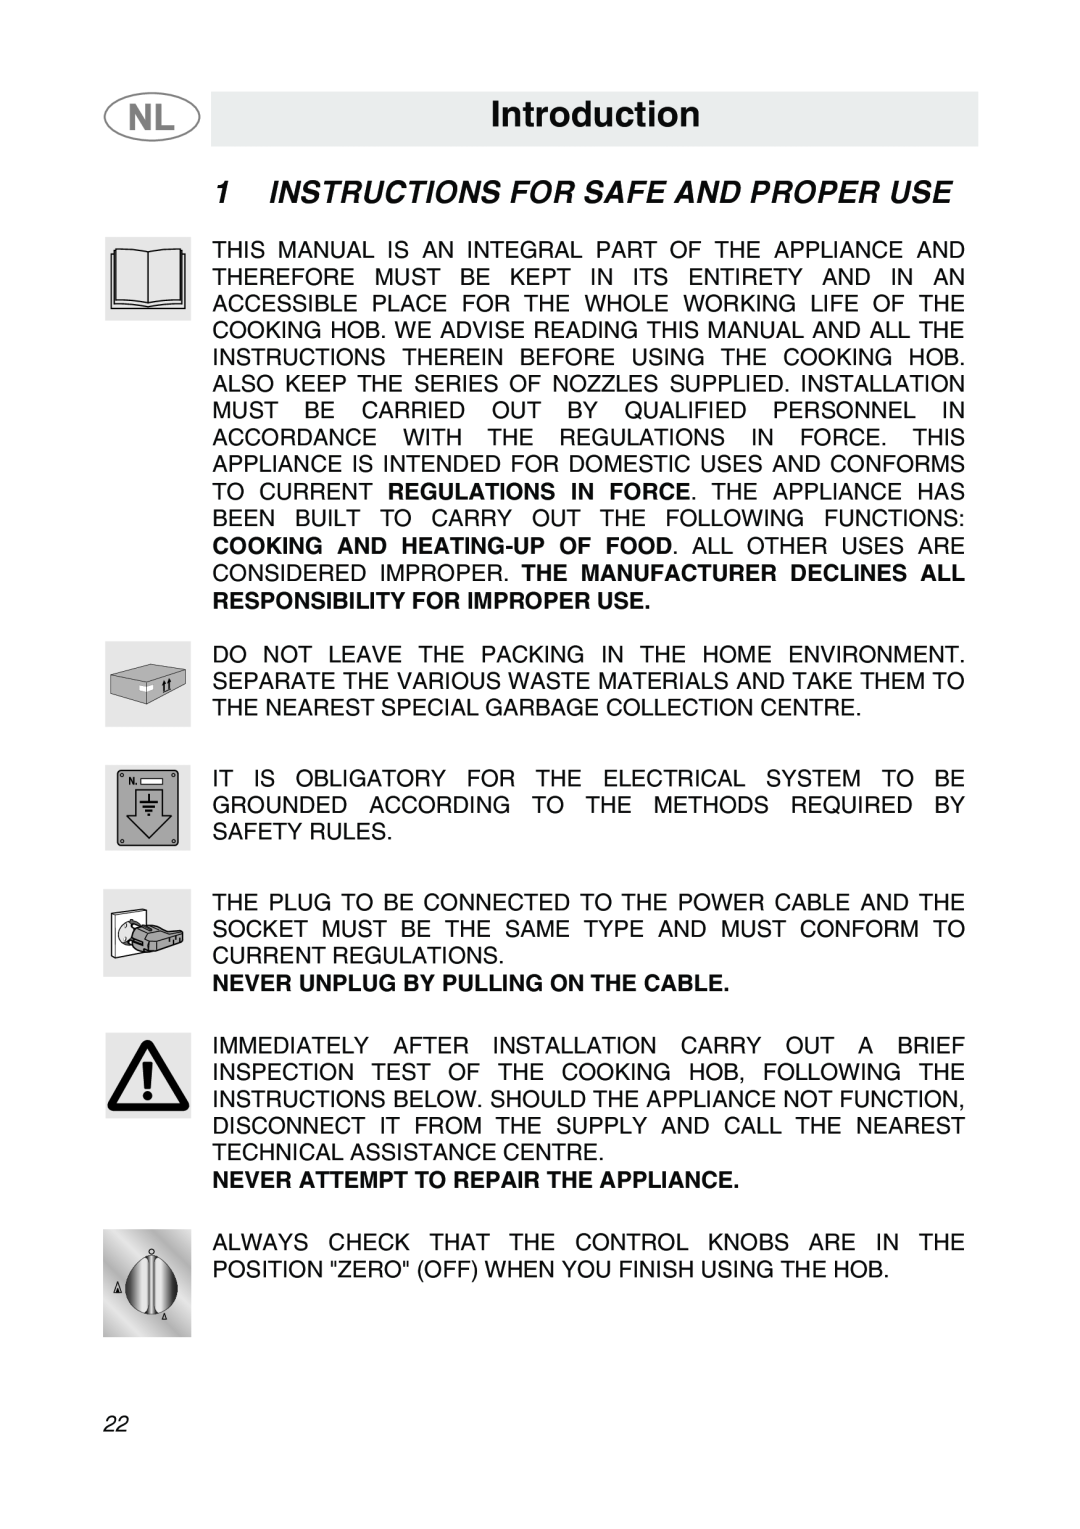 Smeg GKCO755, GKC755 manual Introduction, Instructions For Safe And Proper Use, Responsibility For Improper Use 